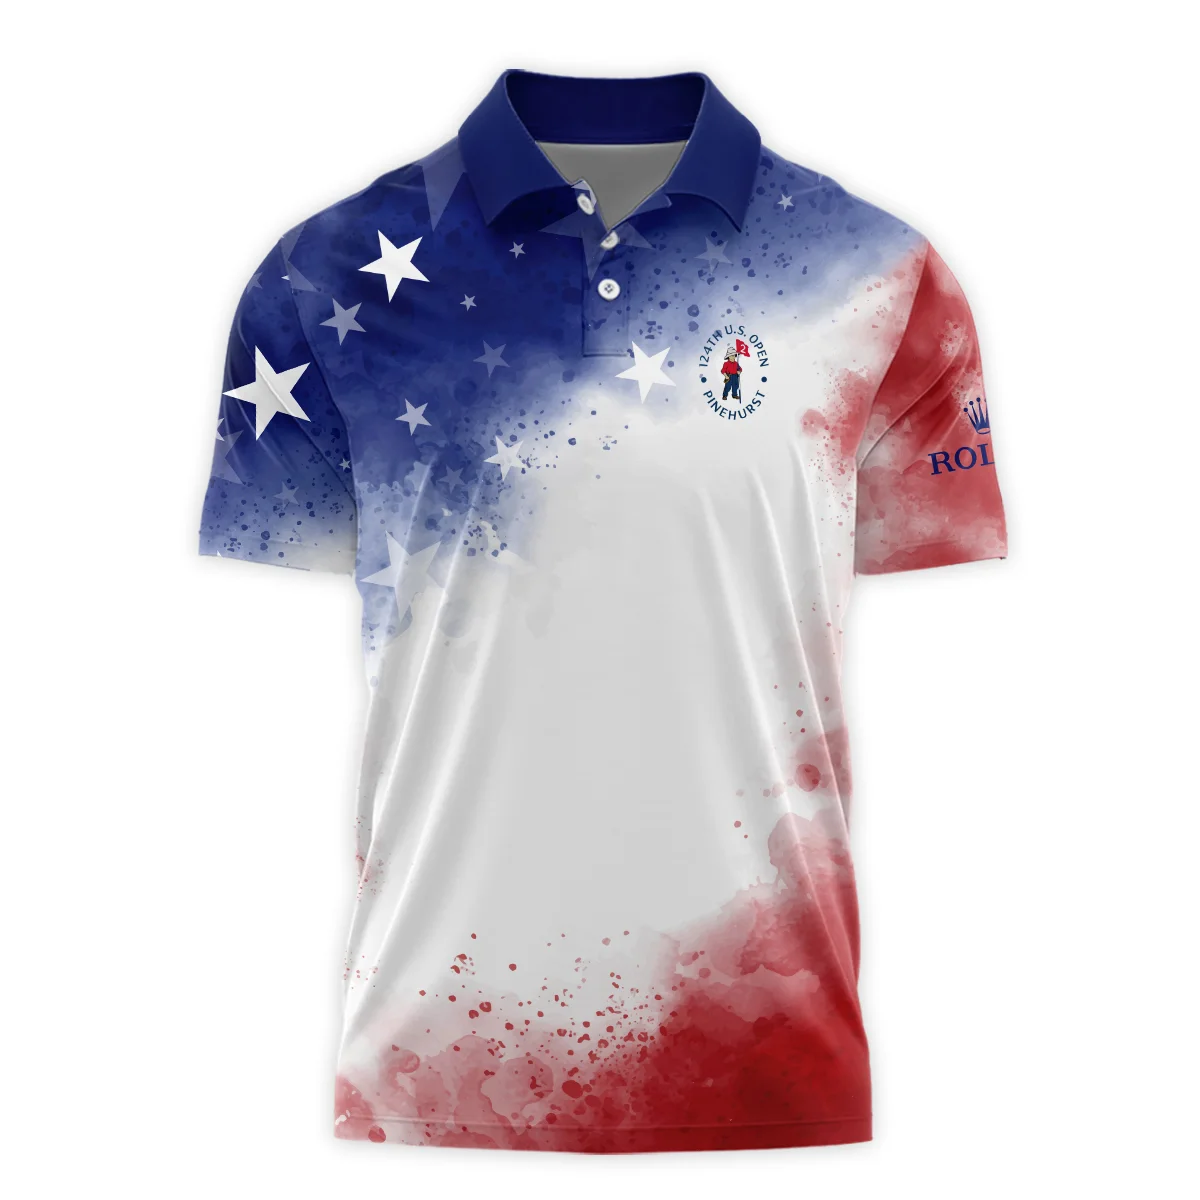 124th U.S. Open Pinehurst Rolex Blue Red Watercolor Star White Backgound Polo Shirt Style Classic Polo Shirt For Men